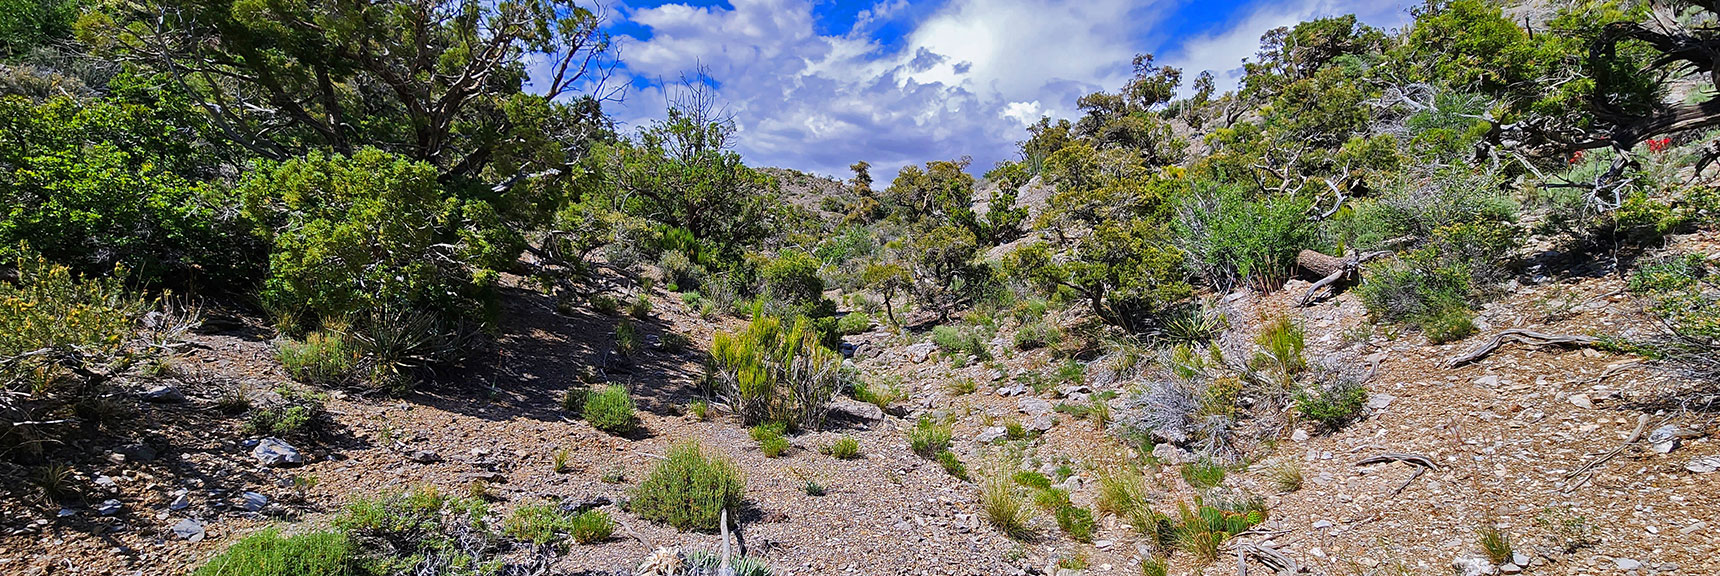 About 1000ft North of Little Zion Trail, on Ridgeline Trail There's Access to Main Approach Trail. | Little Zion | Rainbow Mountain Wilderness, Nevada